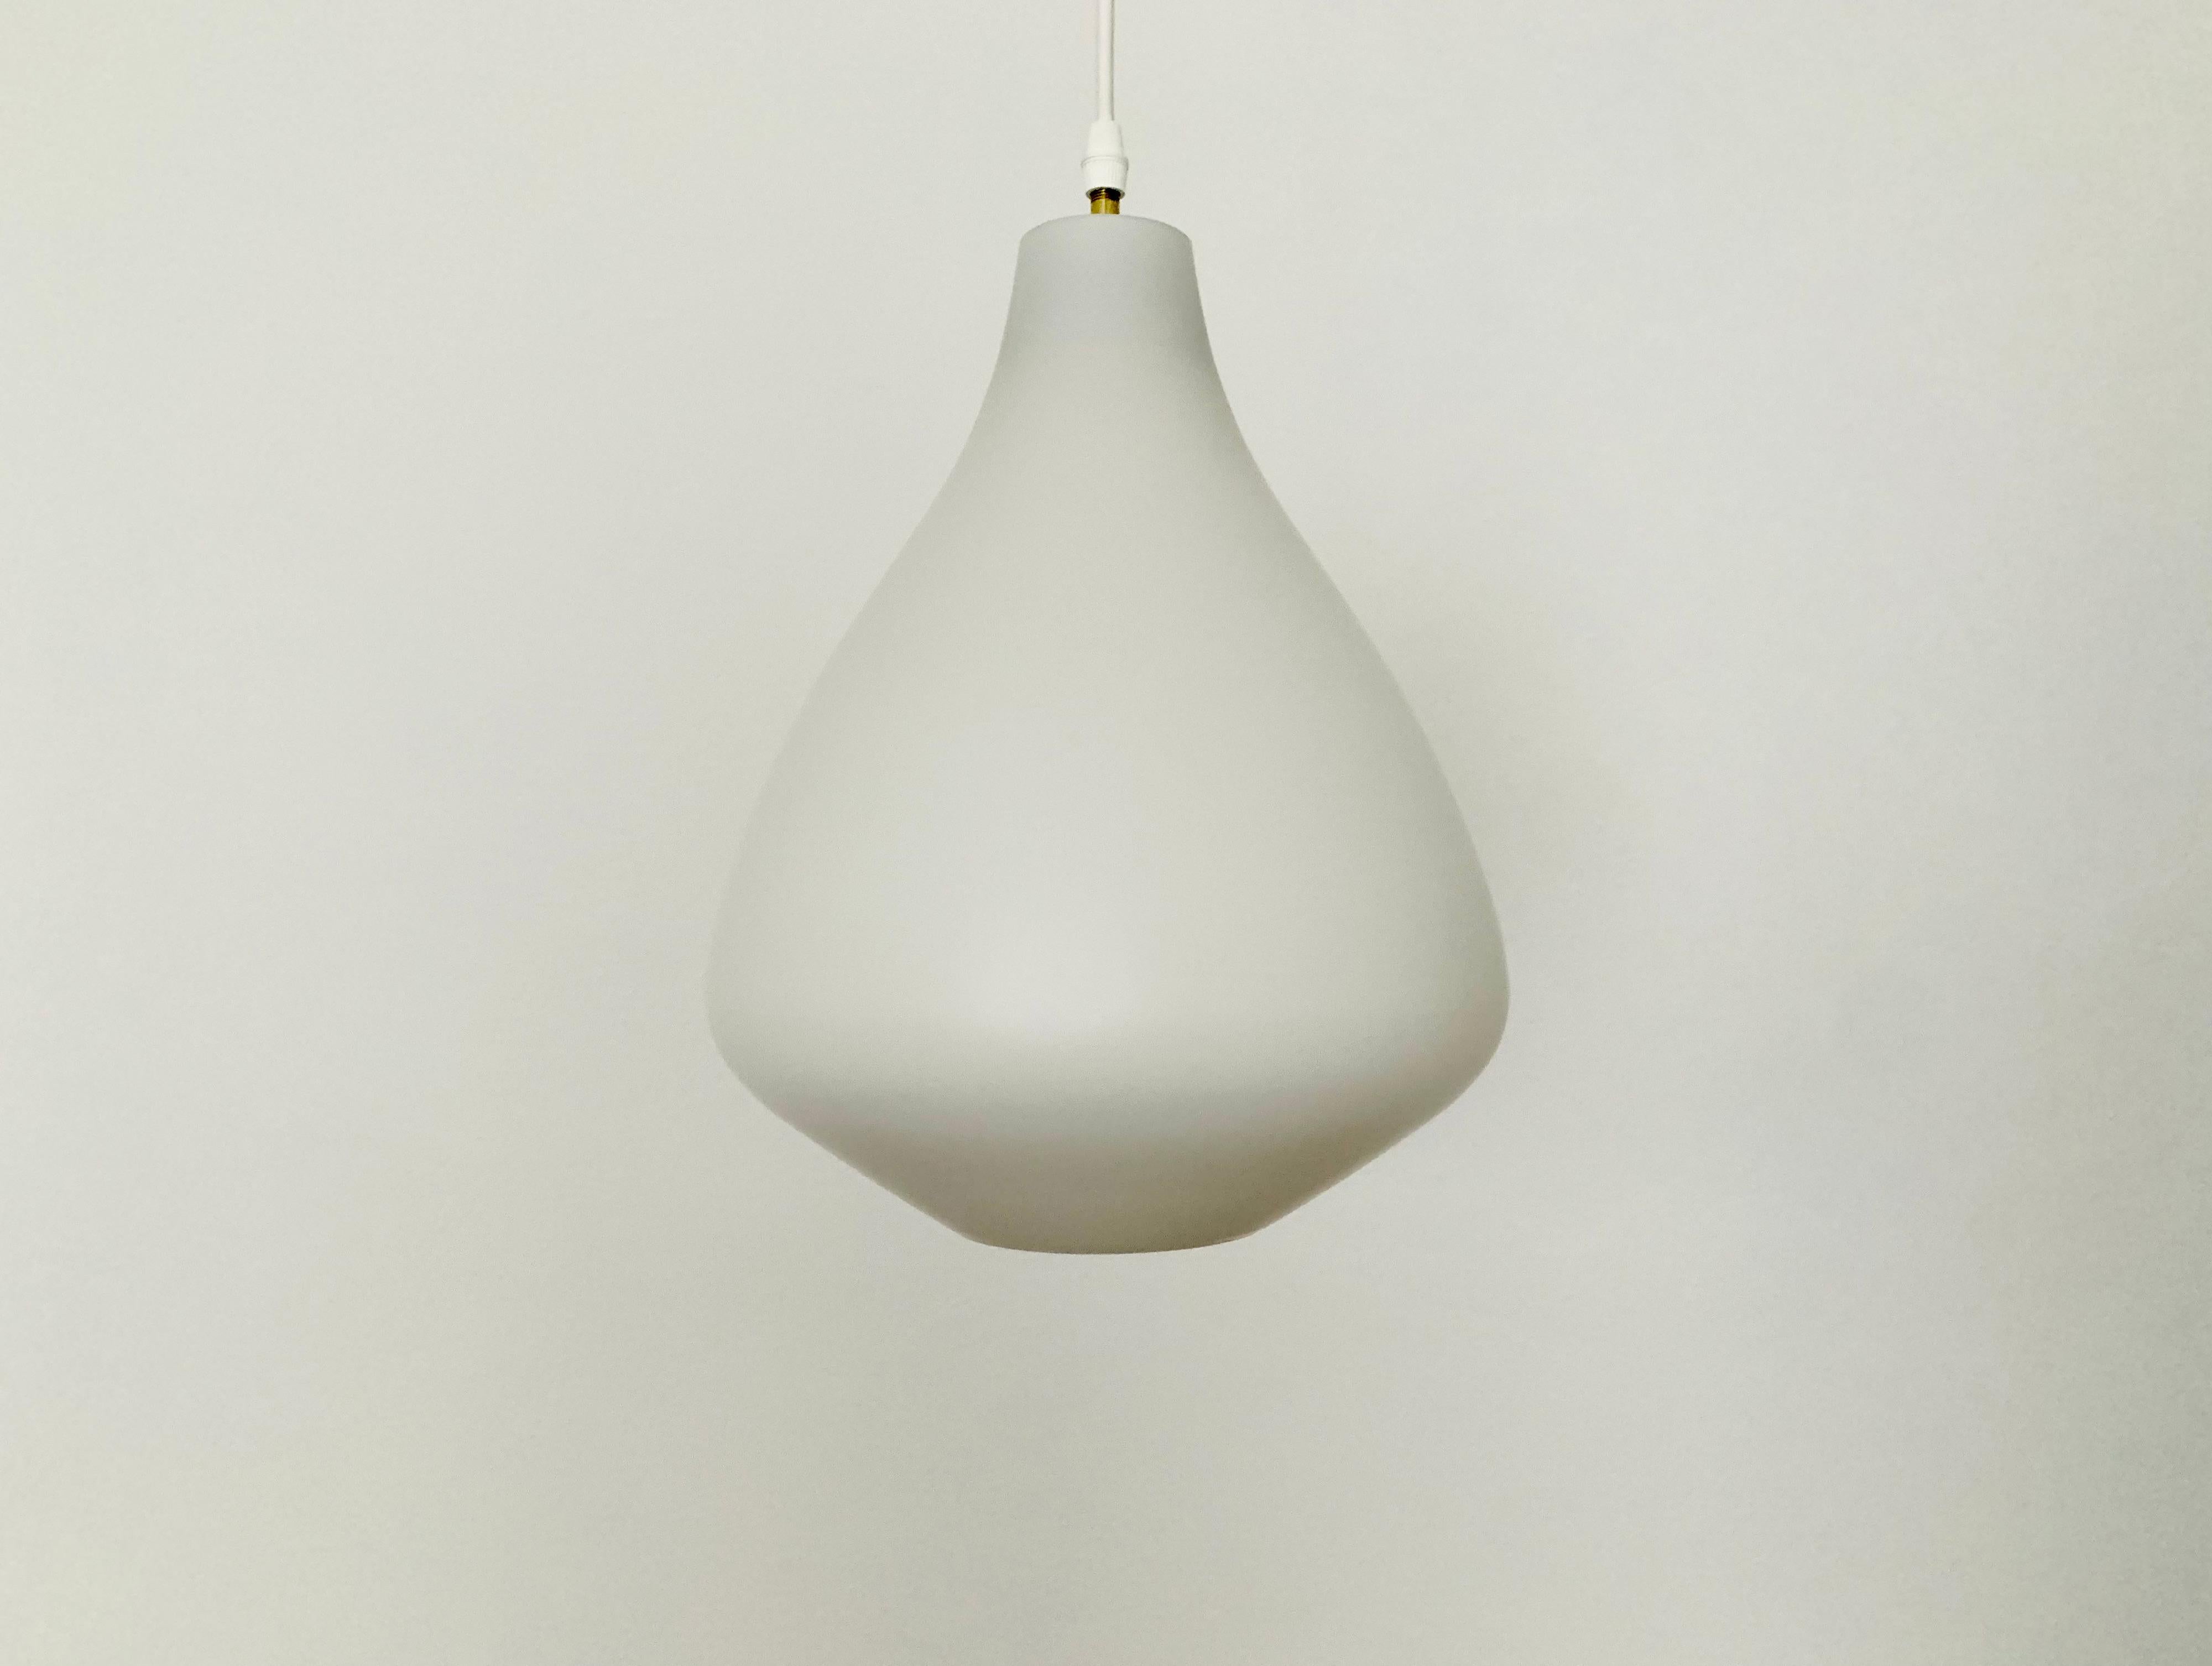 Wonderful opal glass pendant lamp from the 1950s.
Extremely beautiful design and a real eye-catcher in every home.
Extremely beautiful lighting atmosphere with both direct and indirect light.

Manufacturer: Peill and Putzler
Design: Aloys